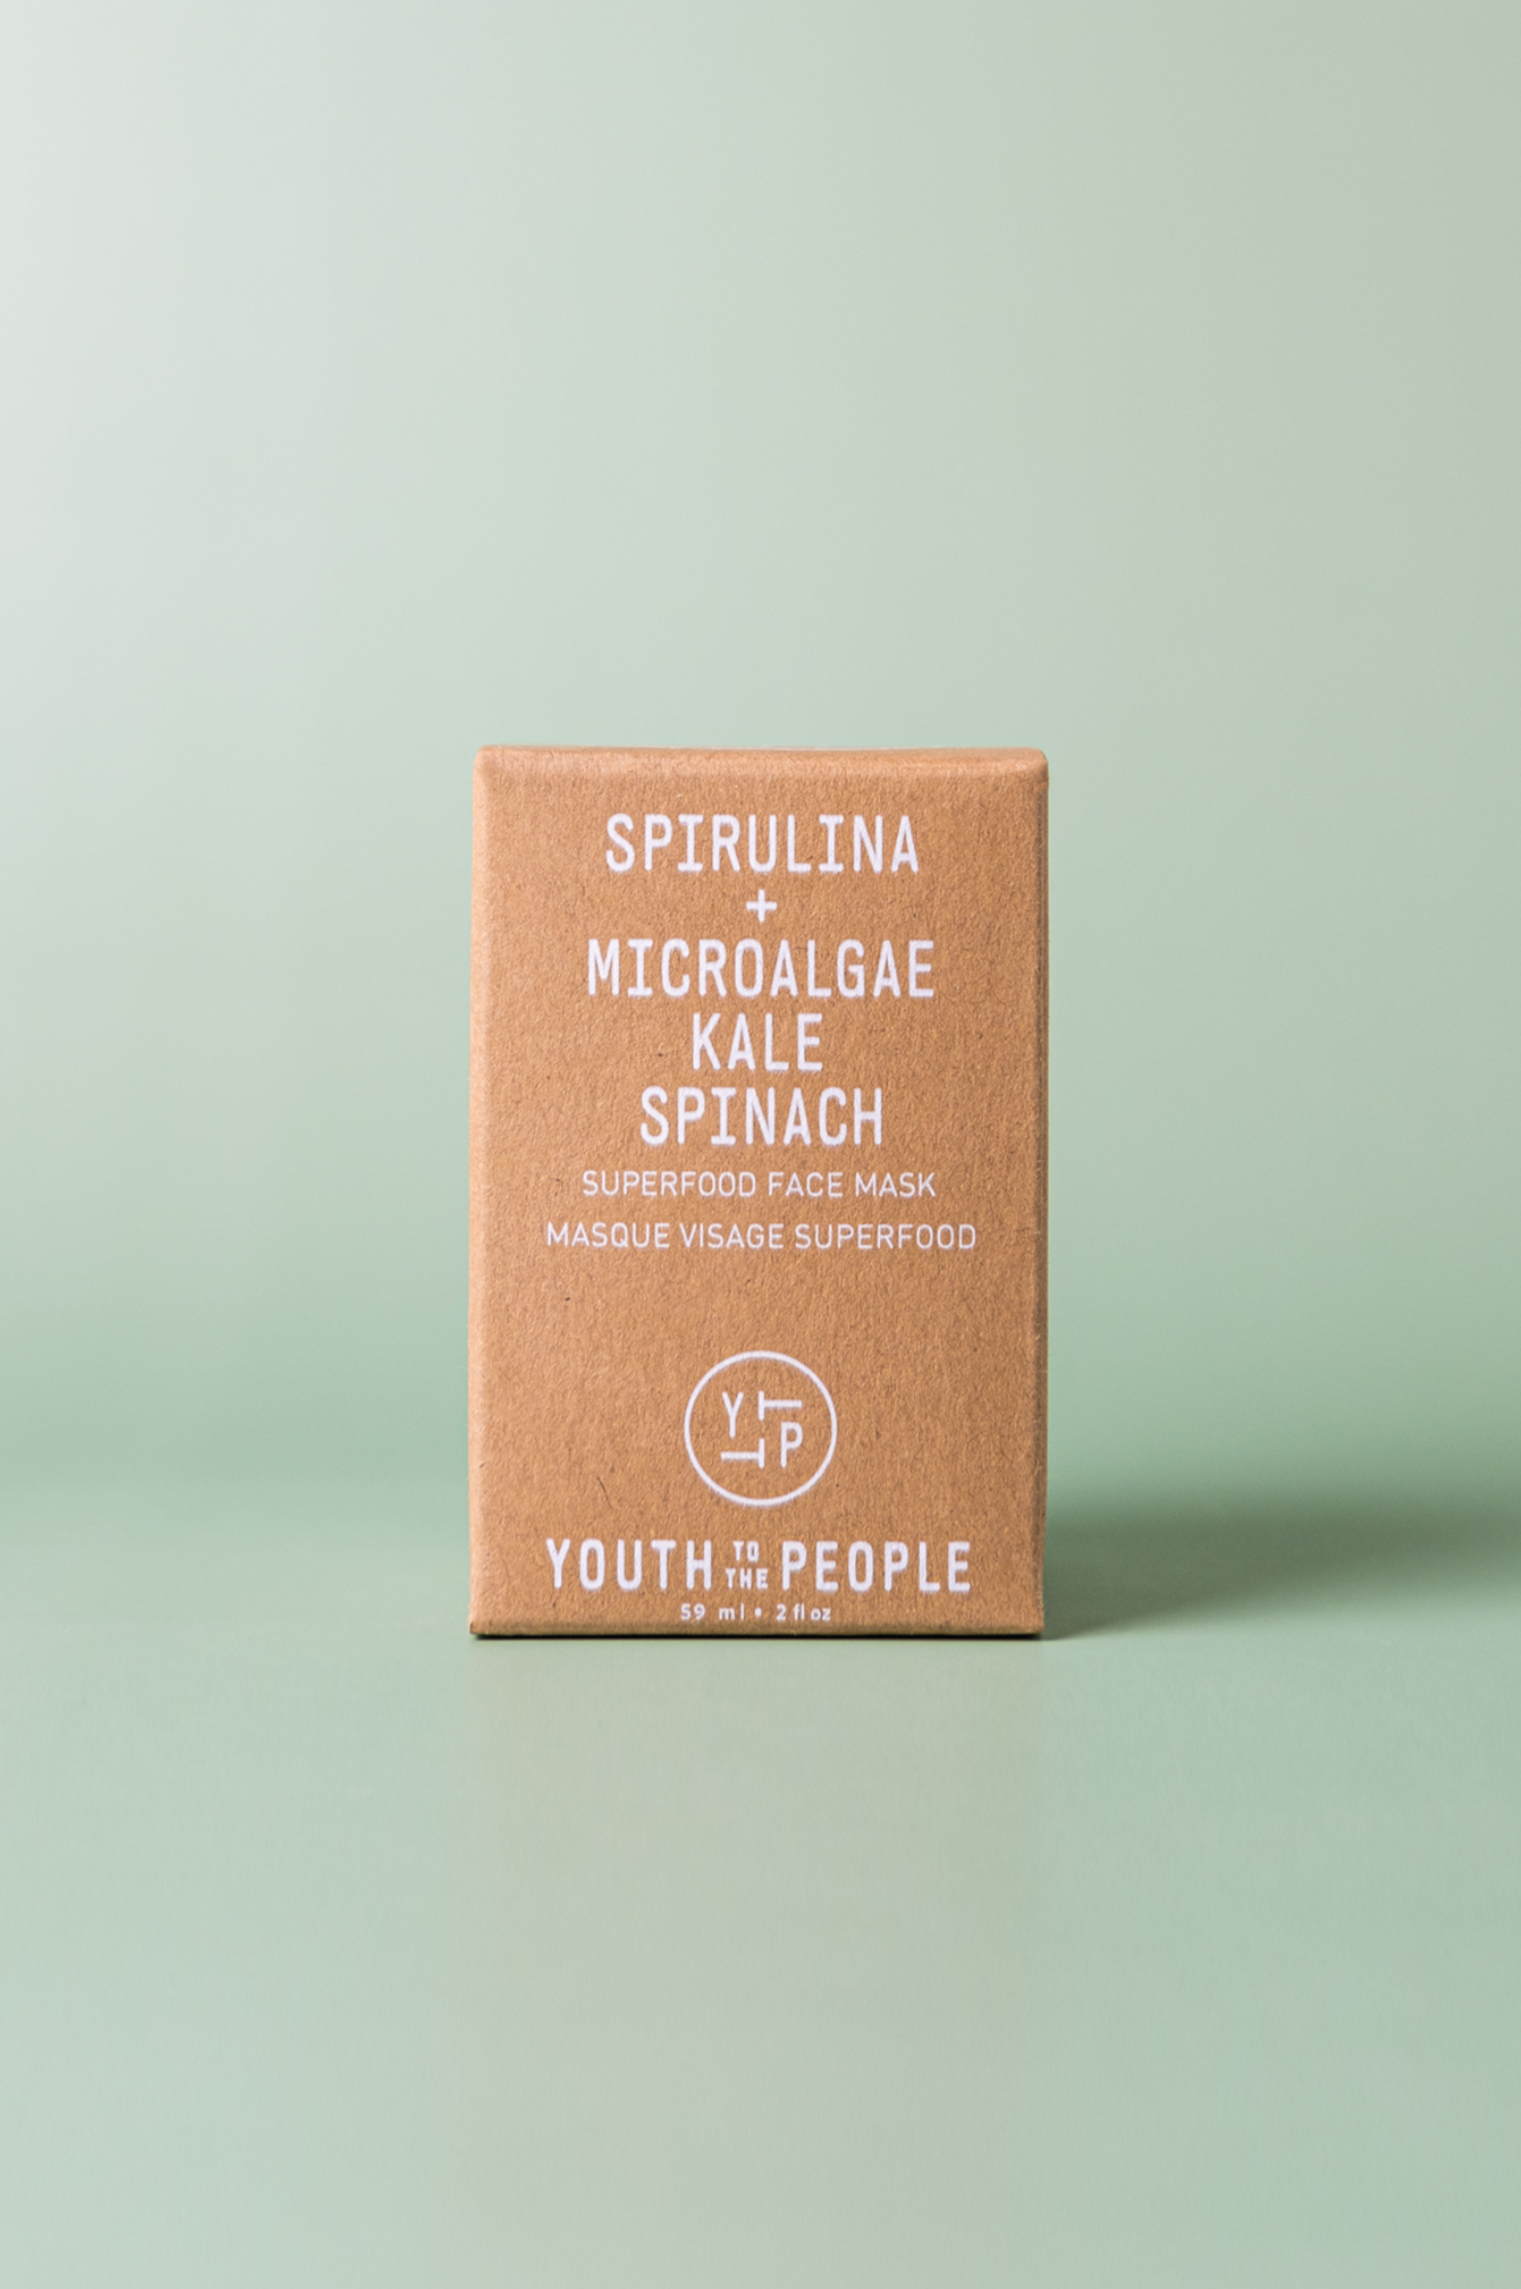 Youth to the People Superfood Skin Reset Mask